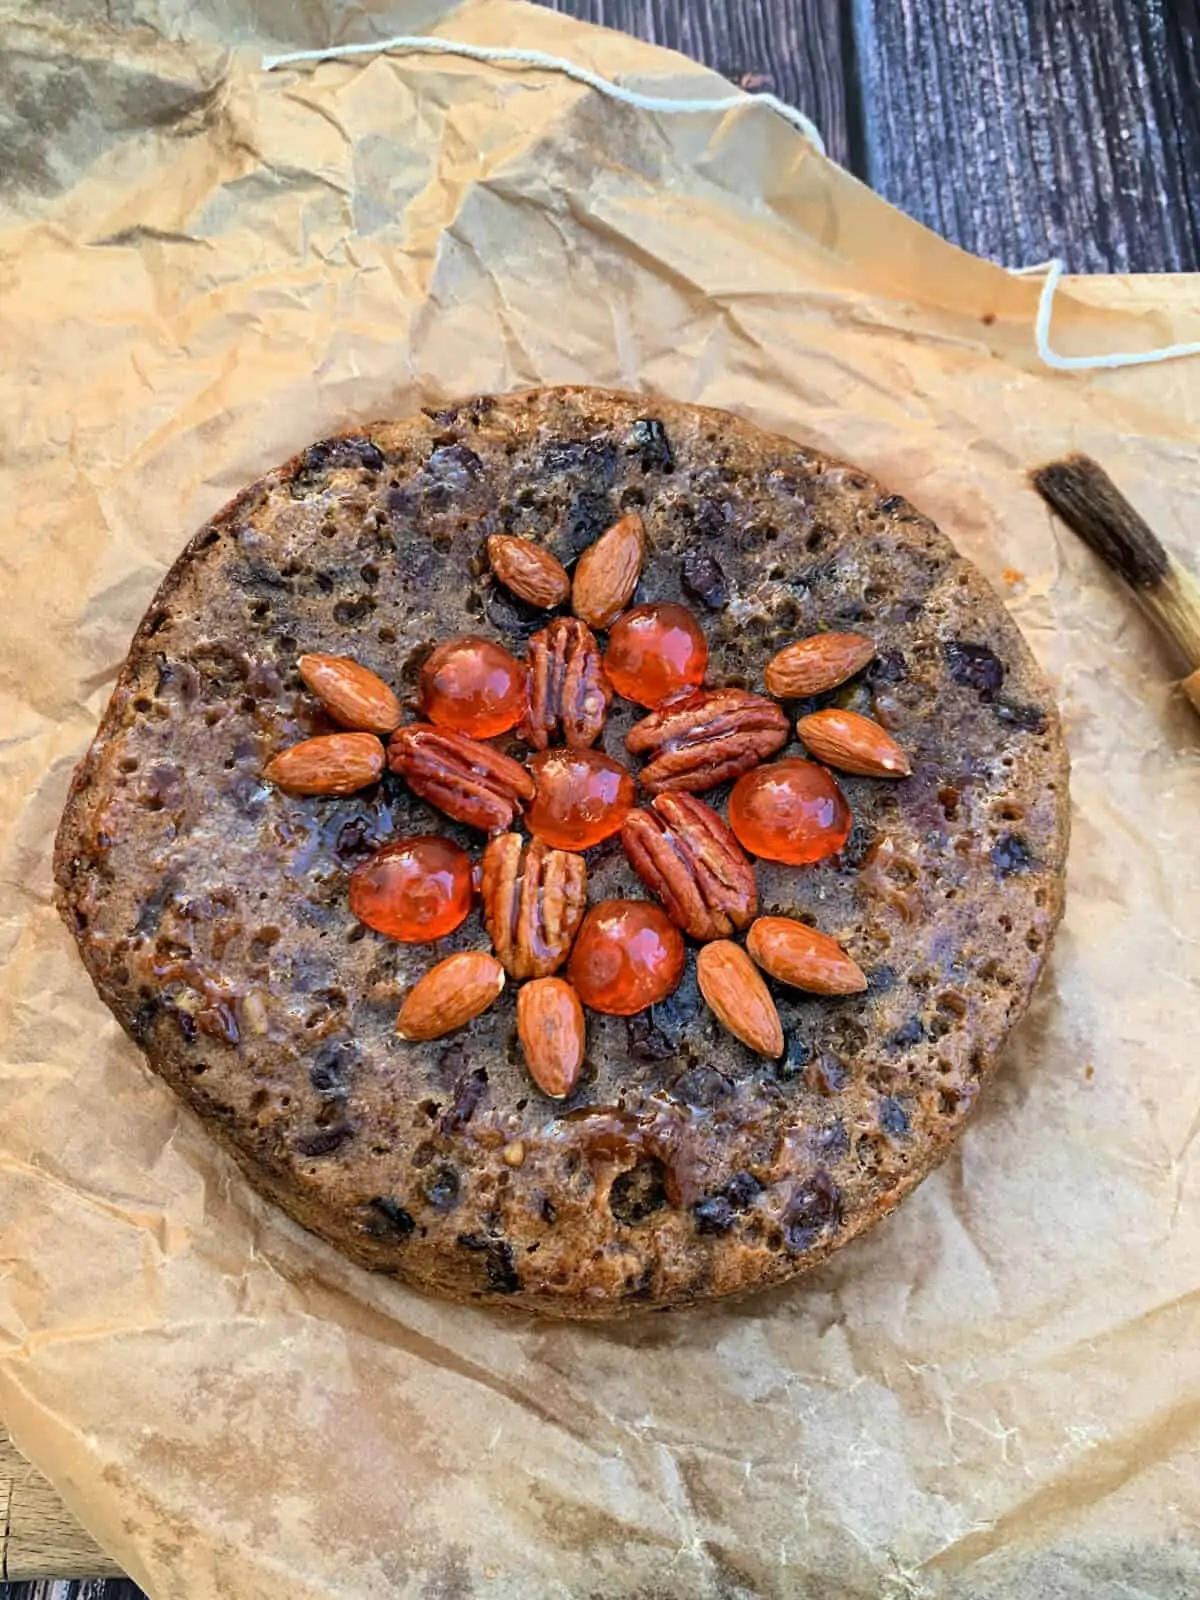 Decorating a fruit cake with nuts.